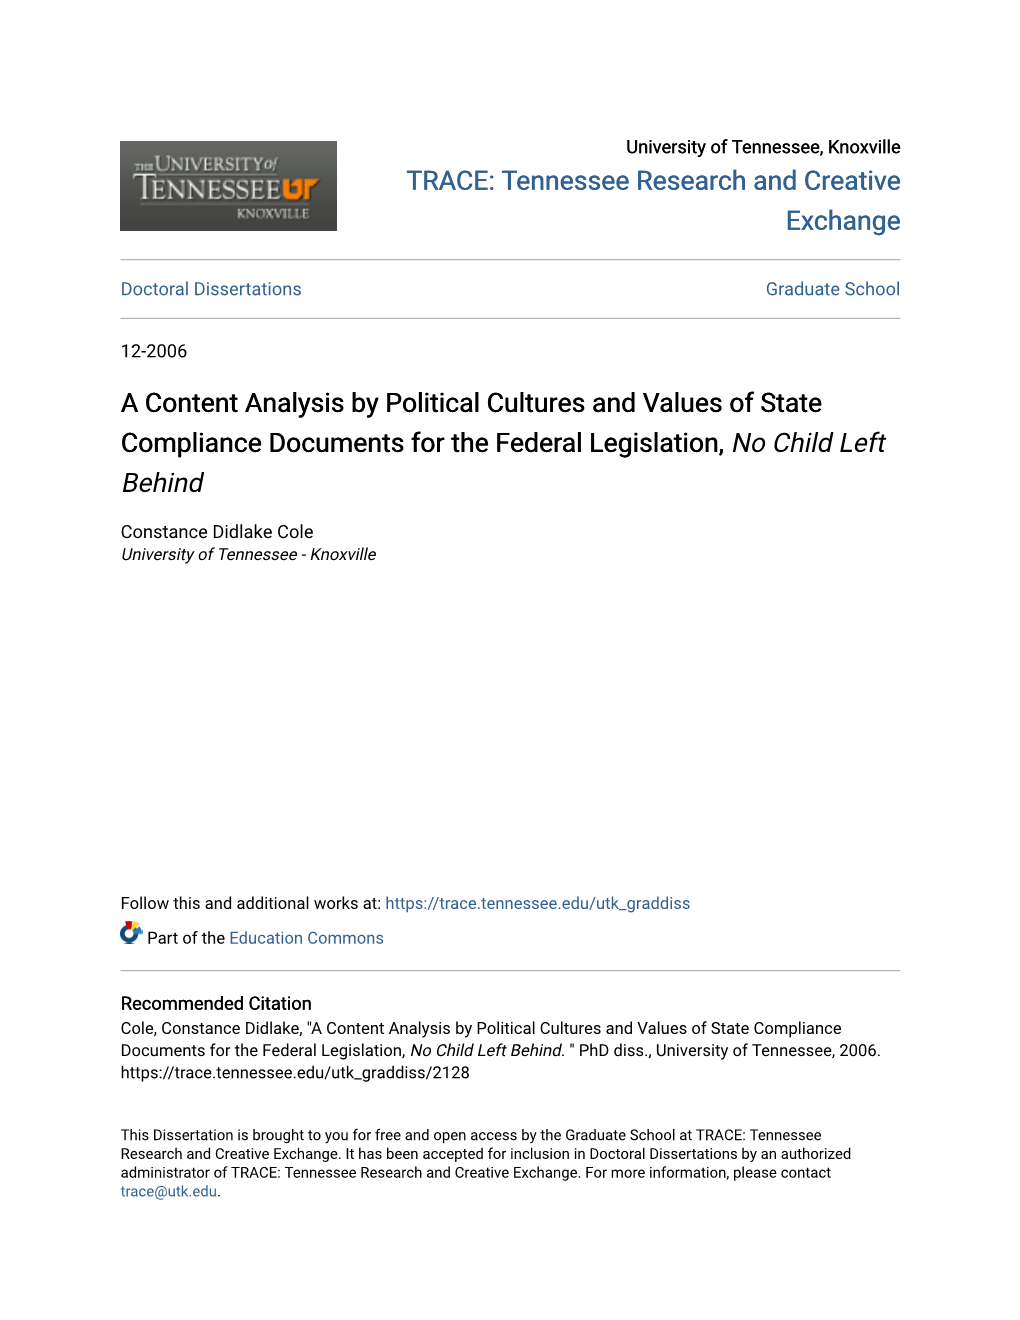 A Content Analysis by Political Cultures and Values of State Compliance Documents for the Federal Legislation, No Child Left Behind